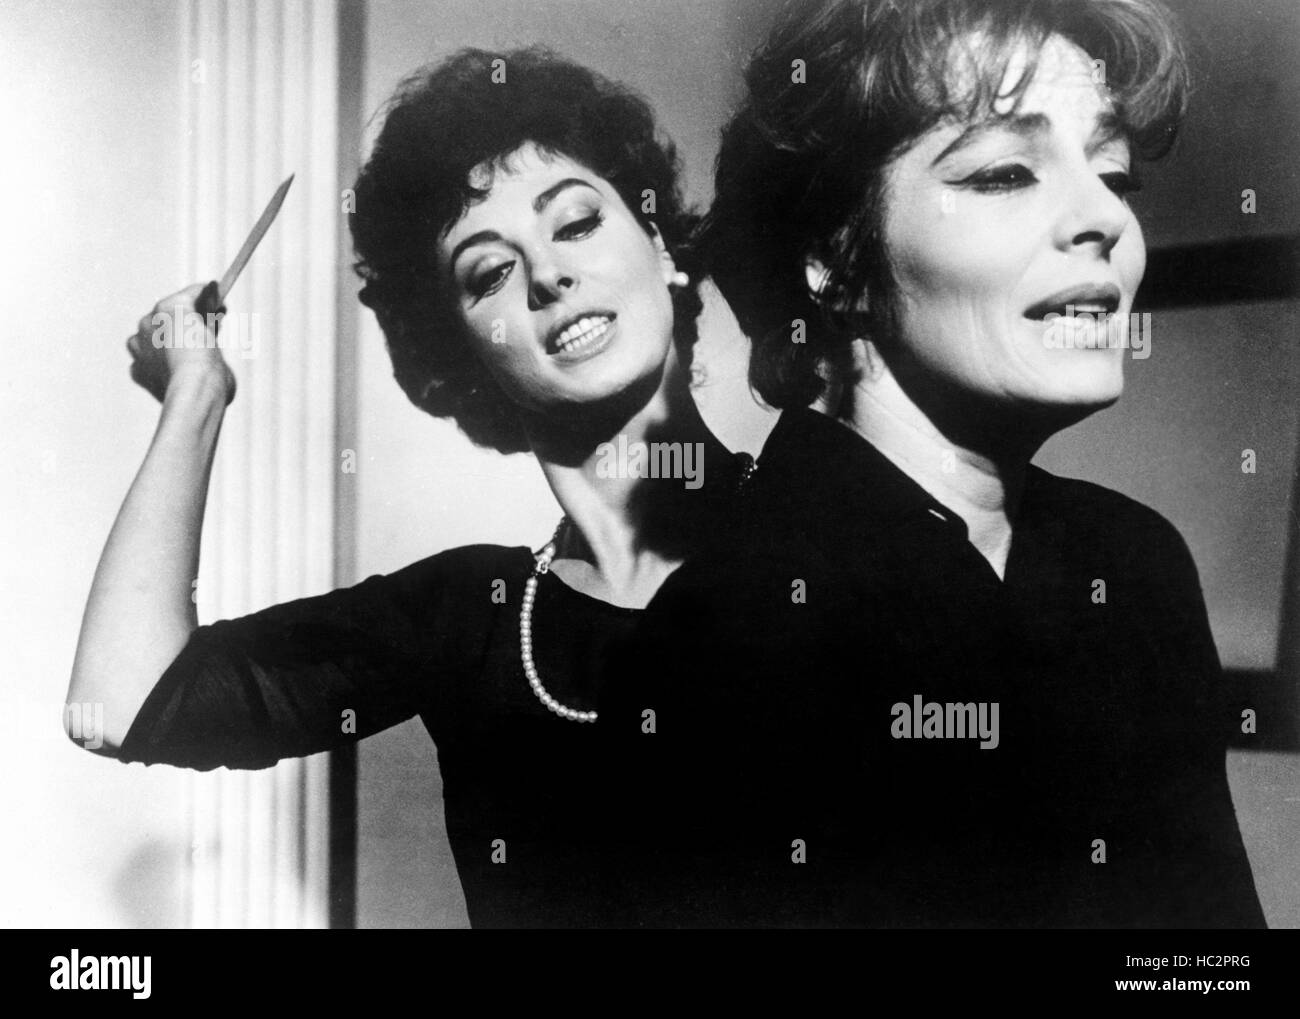 NO EXIT, (aka SINNERS GO TO HELL), from left: Rita Gam, viveca Lindfors ...